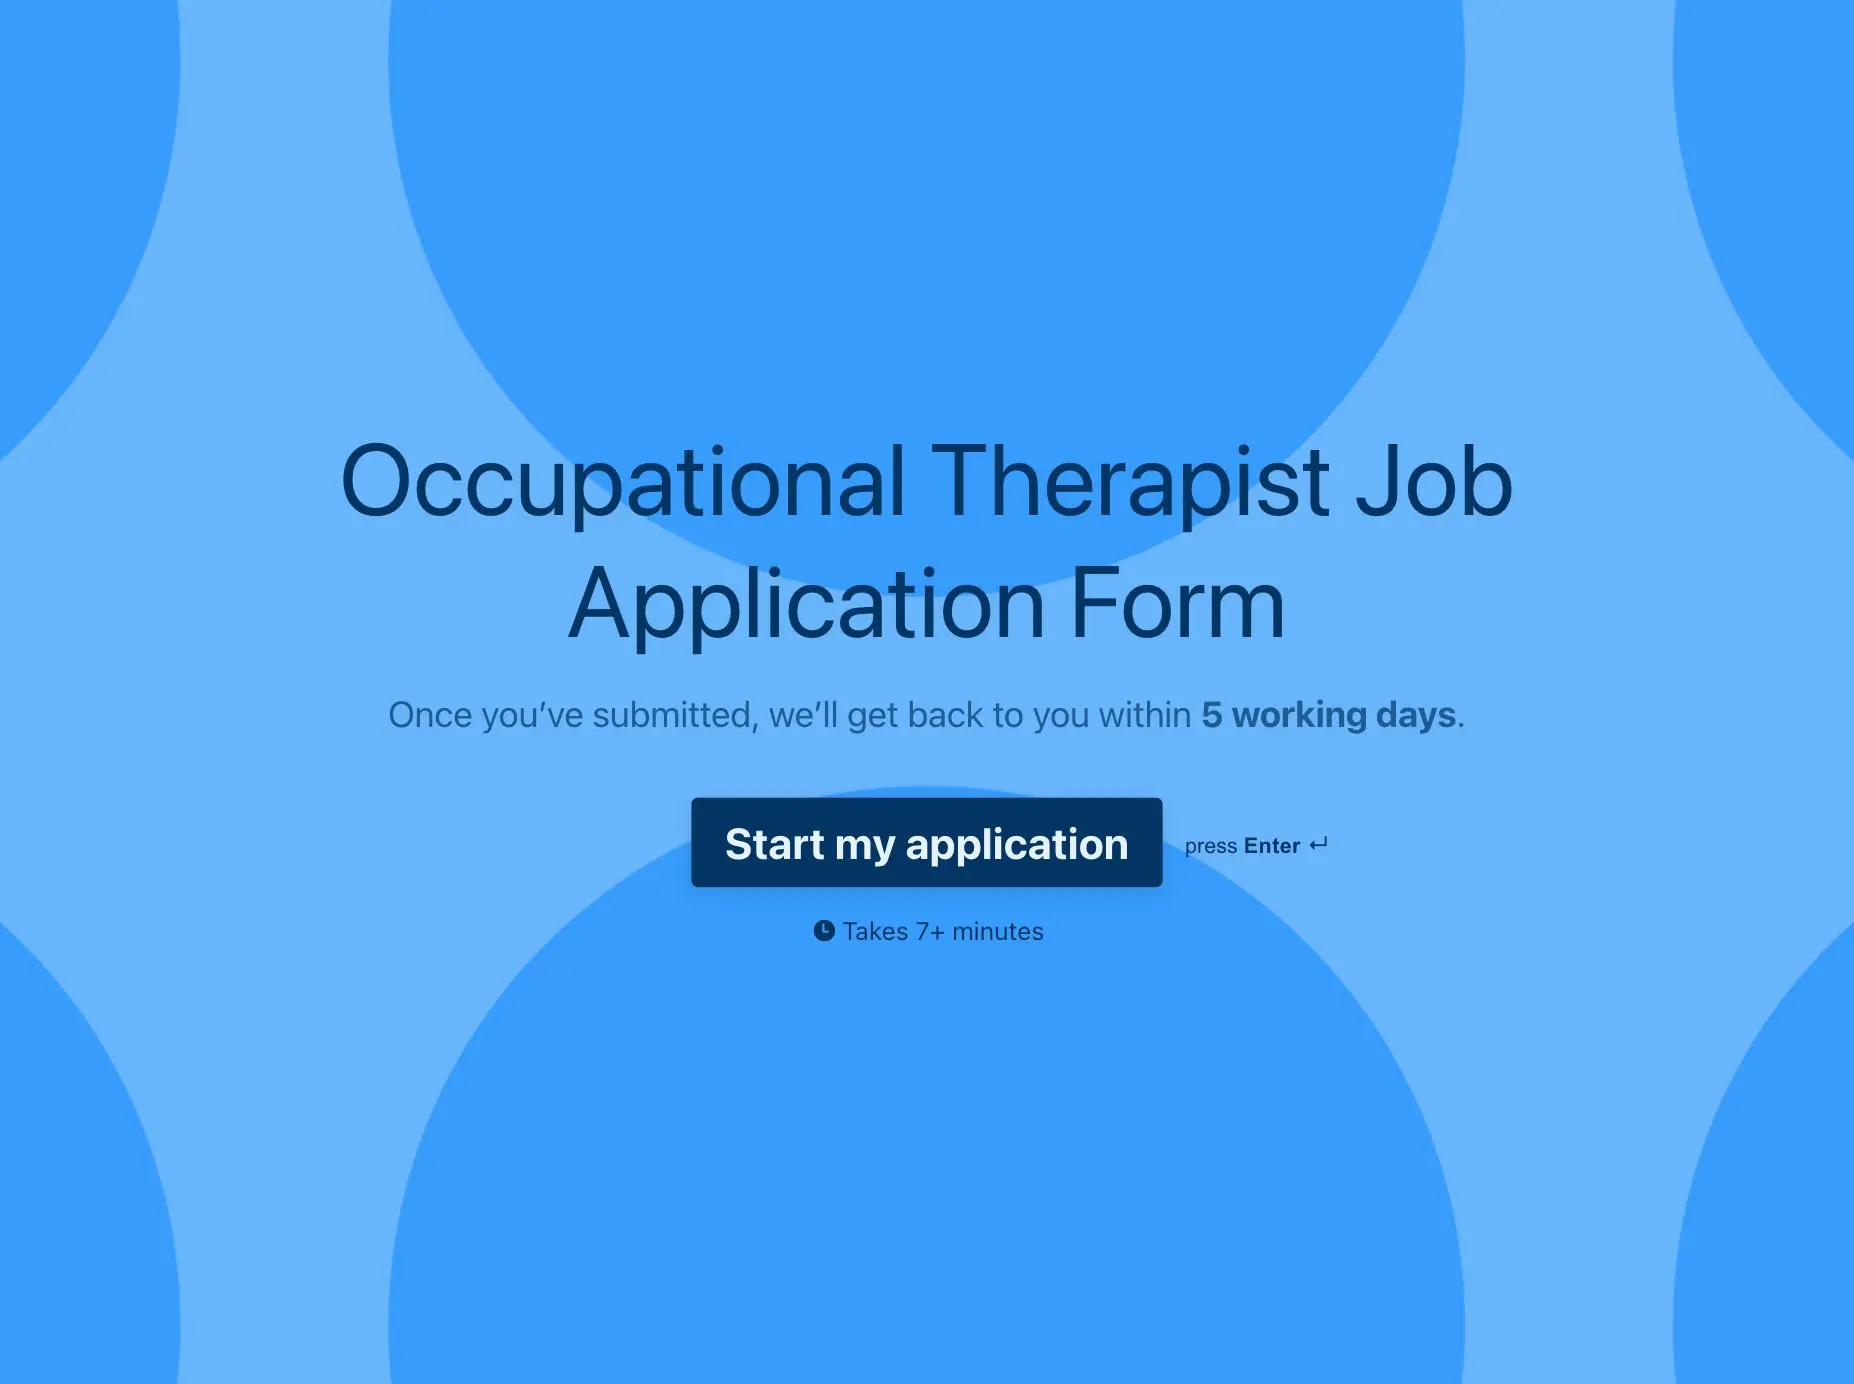 Occupational Therapist Job Application Form Template Hero